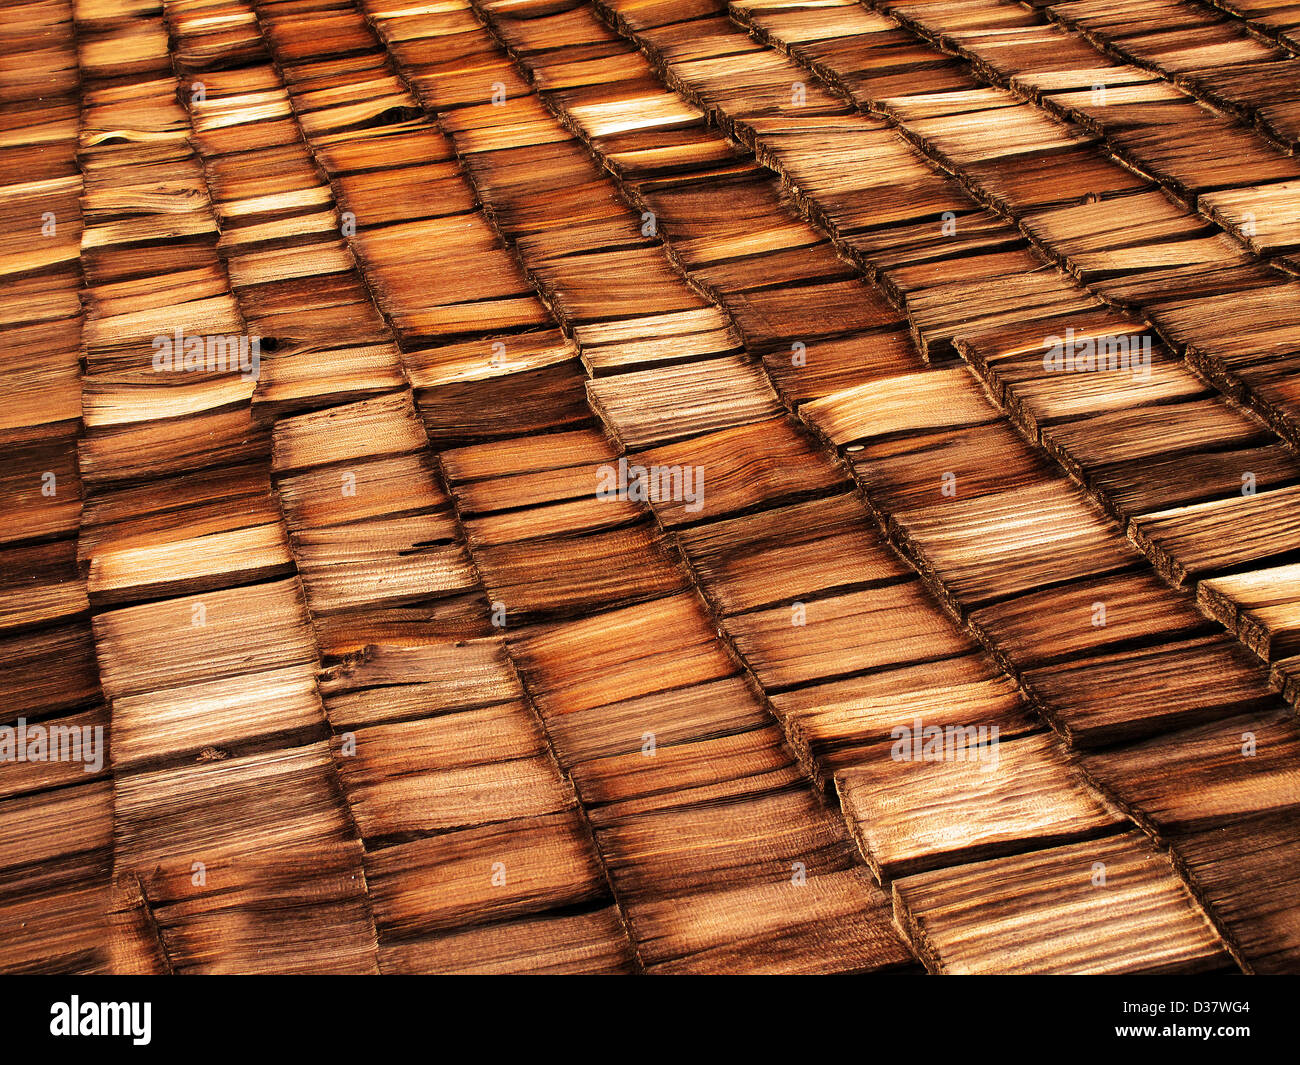 Old wood shingle roof with texture and brown color Stock Photo